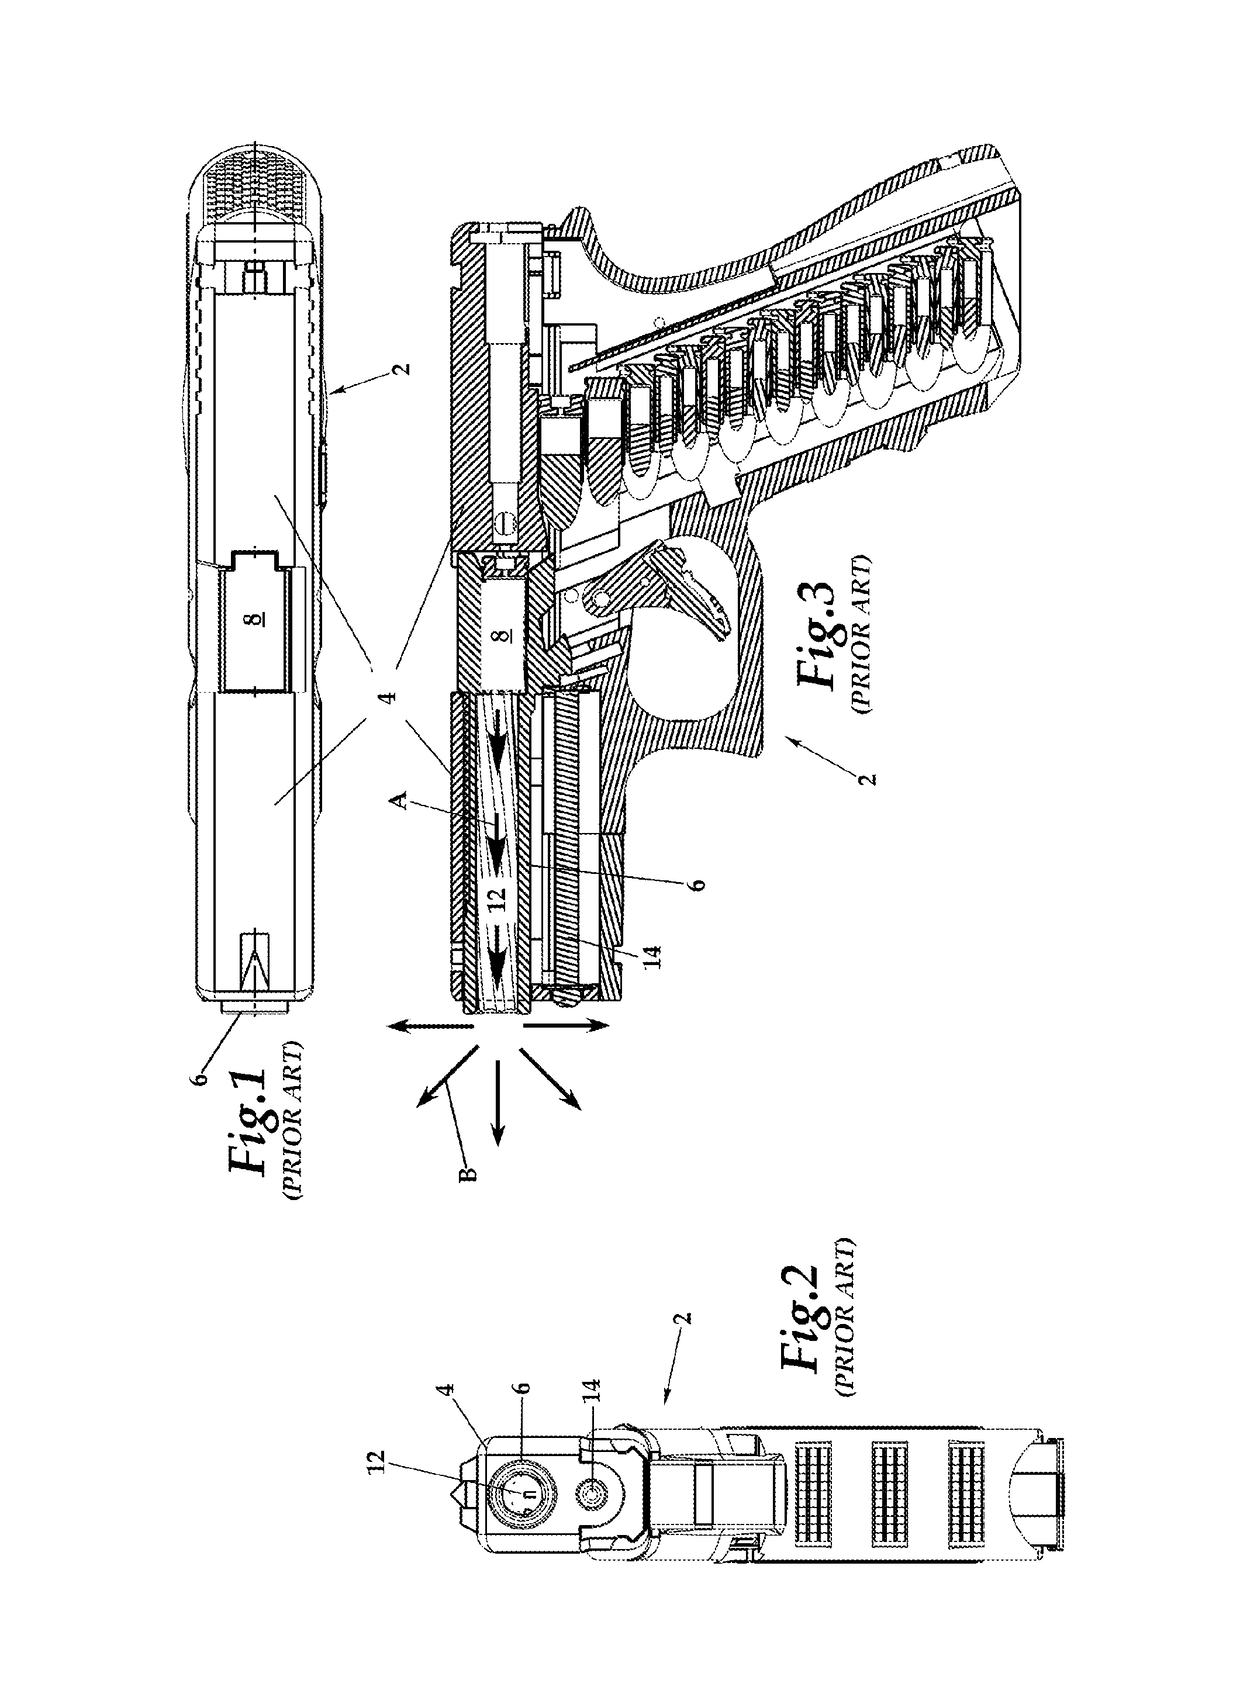 Muzzle brake with propelling nozzle for recoil control